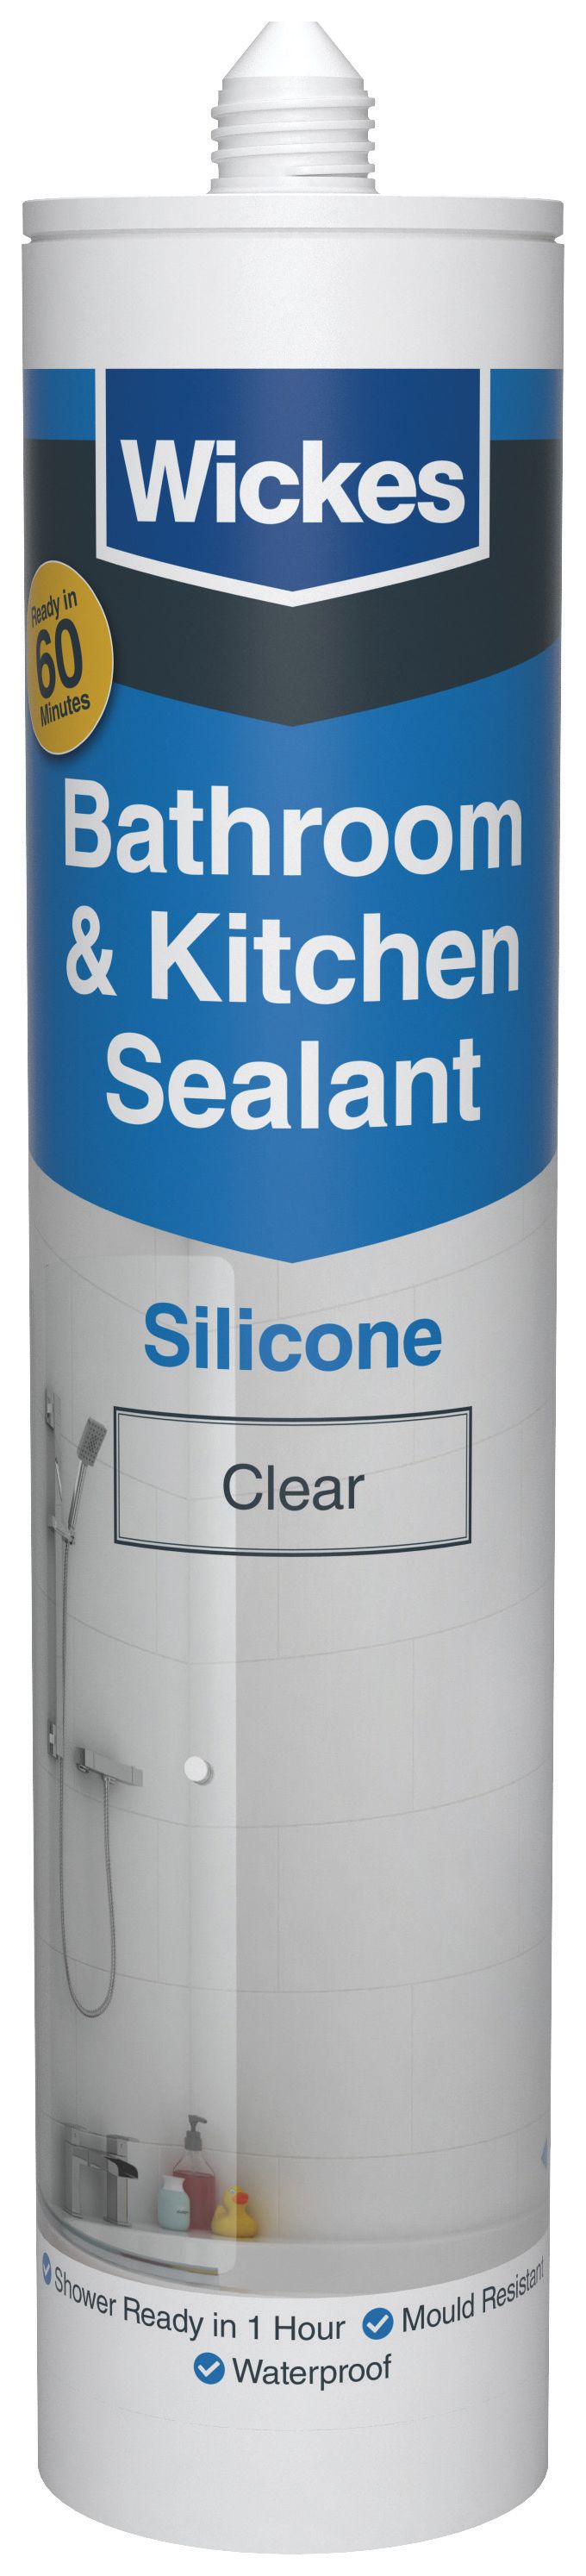 Image of Wickes 60 Minute Kitchen & Bathroom Sealant - Clear - 300ml